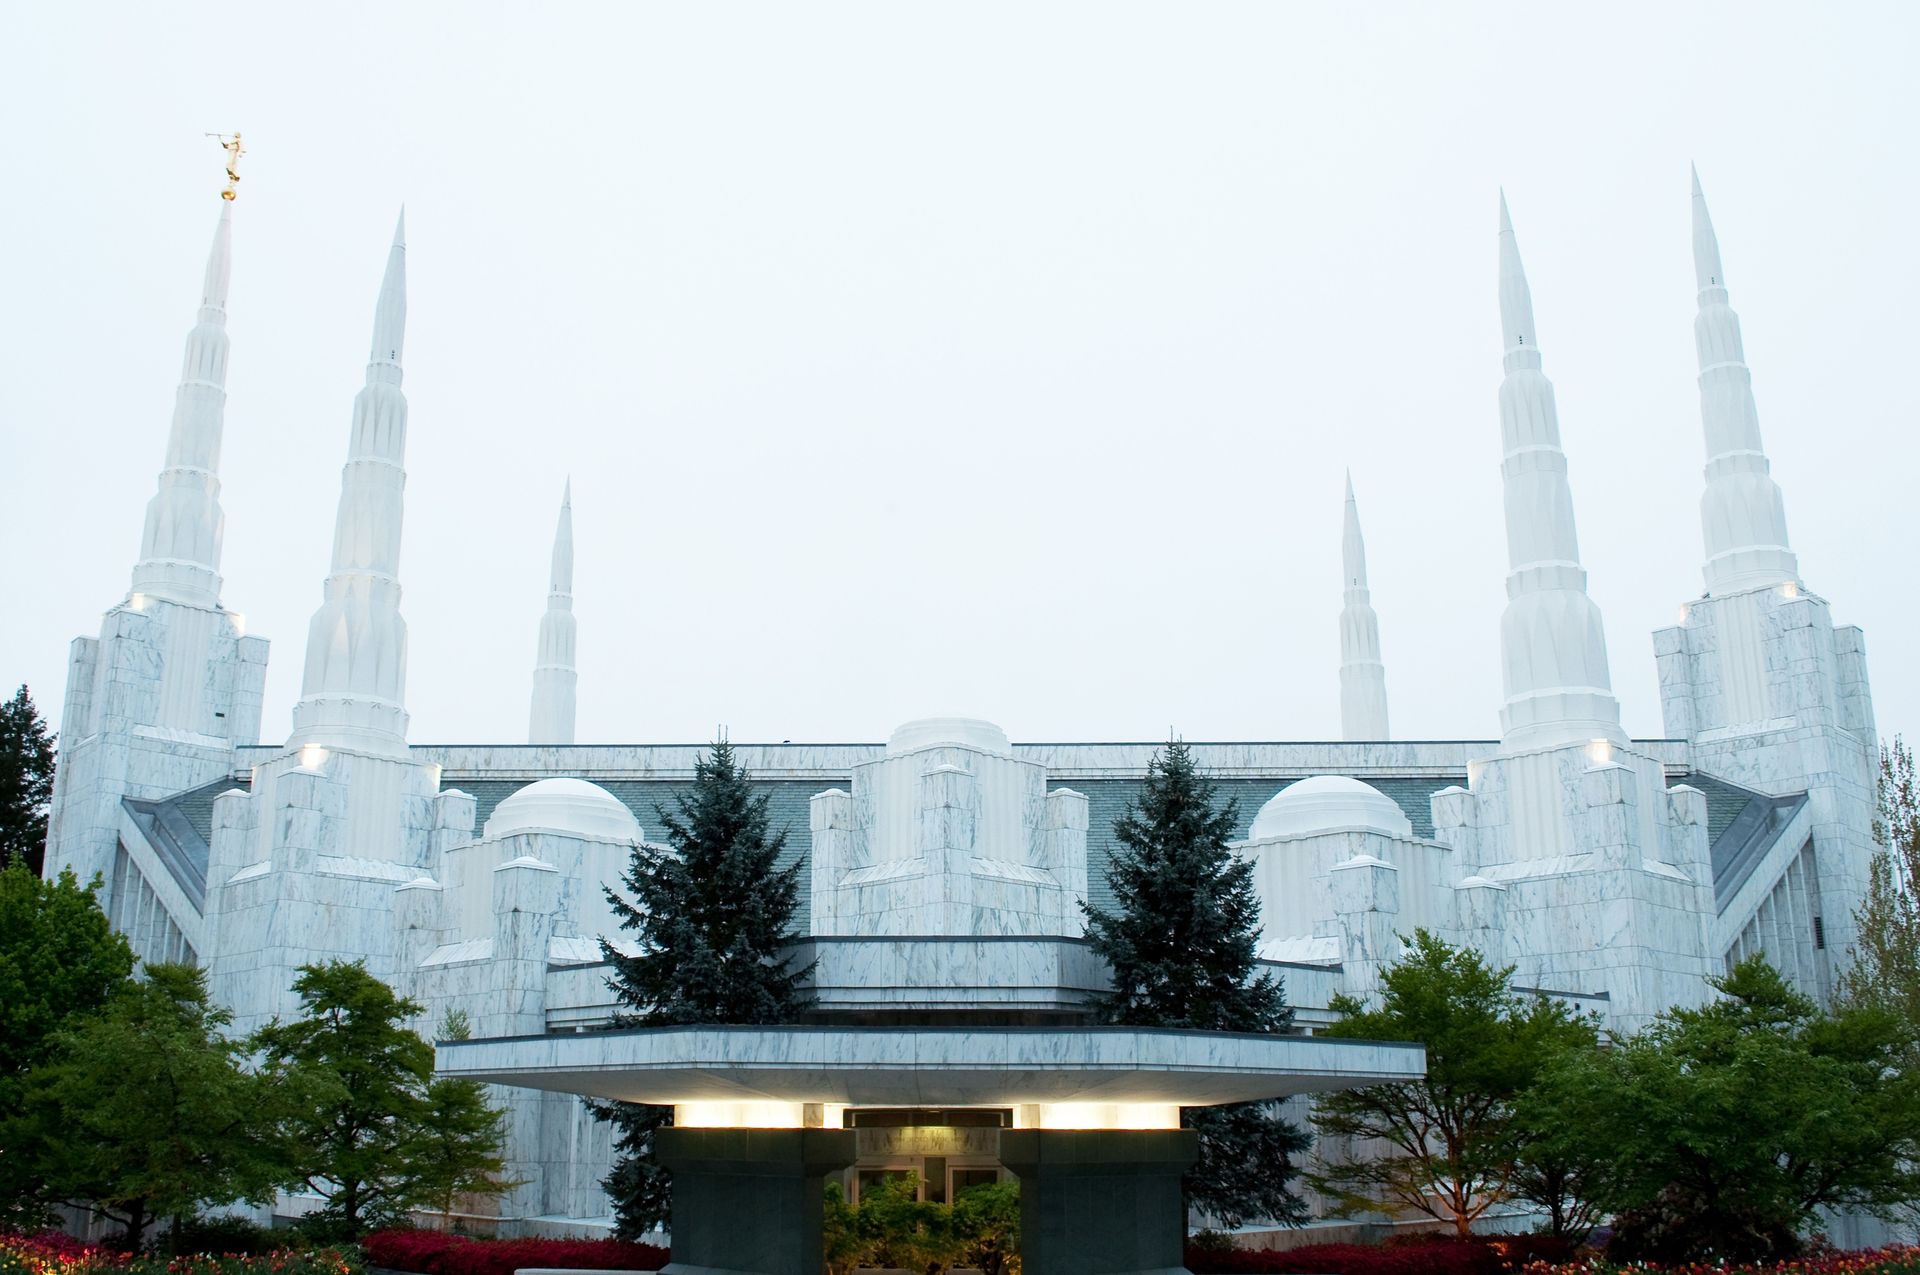 The Portland Oregon Temple and its entrance on a cloudy day.